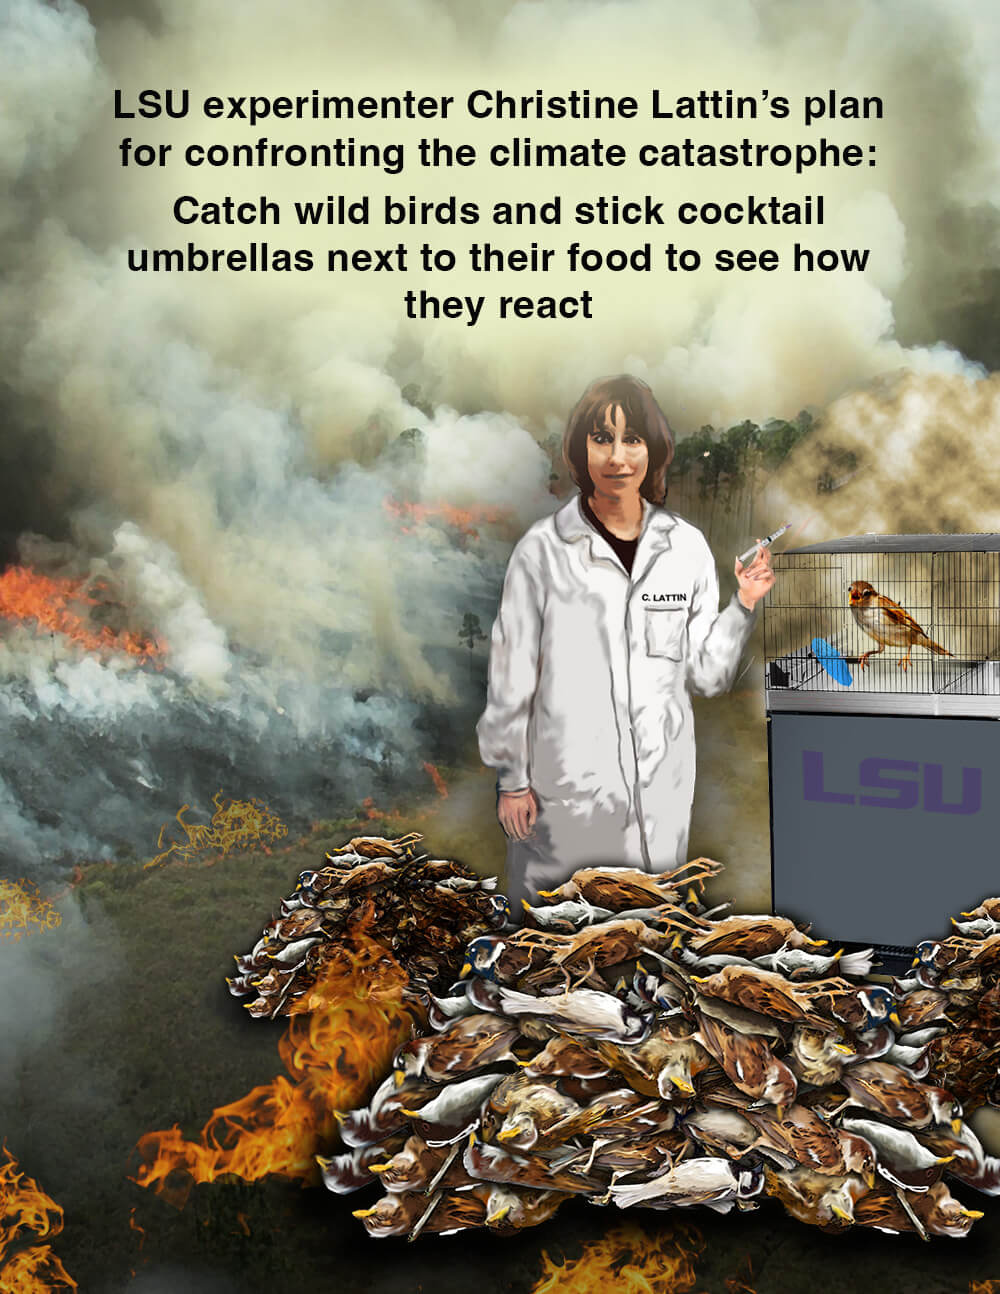 LSU experimenter Christine Lattin's plan for confronting the climate catastrophe: Catch wild birds and stick cocktail umbrellas next to their food to see how they react